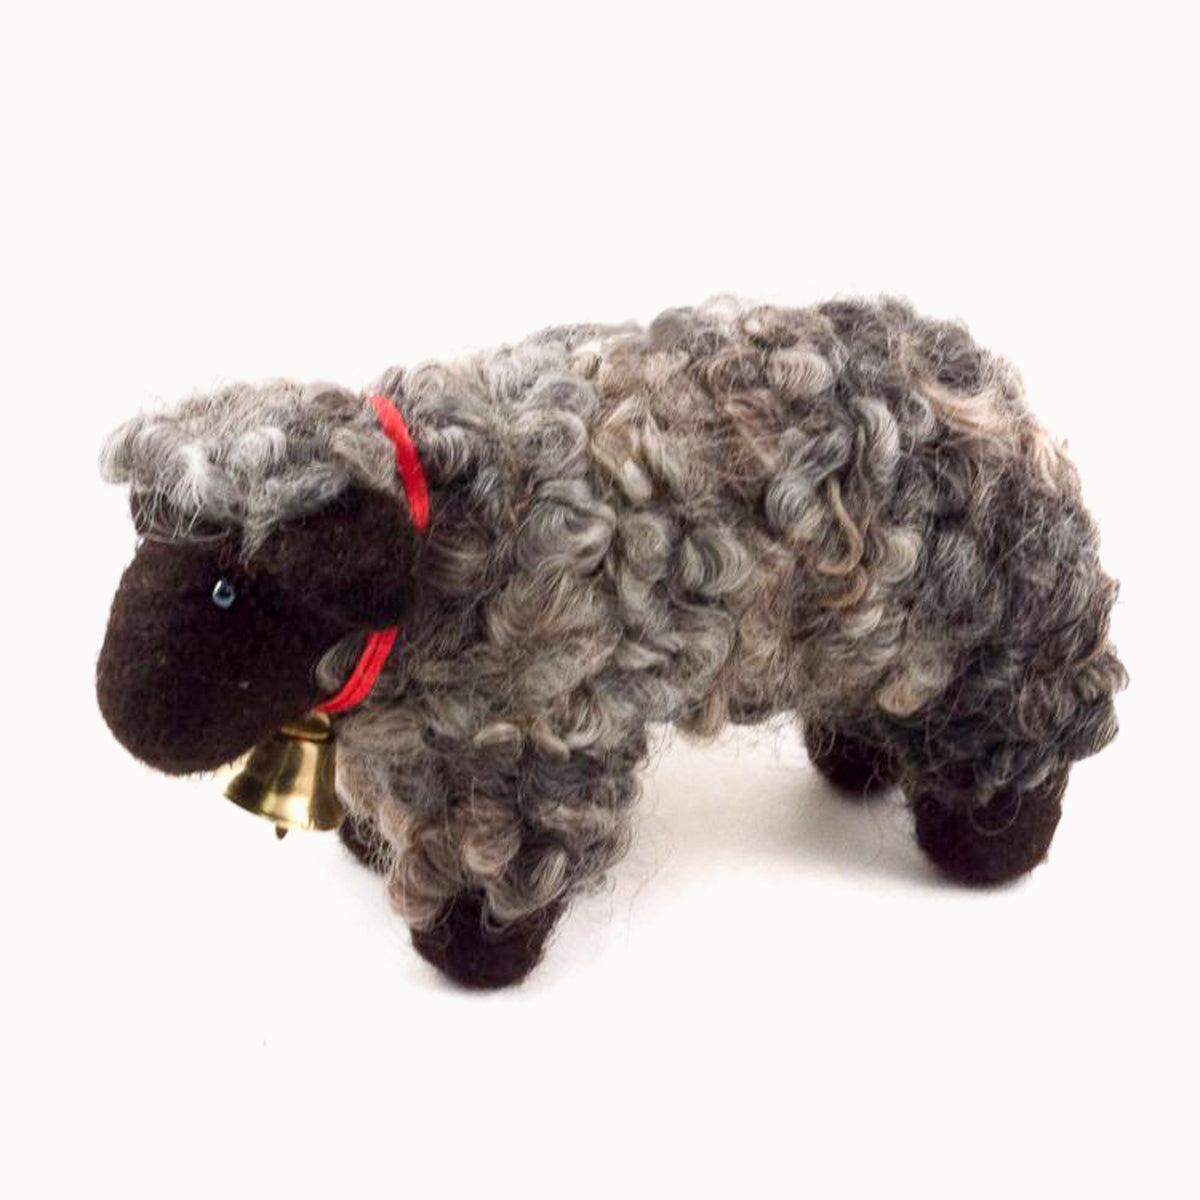 felted wool gray sheep